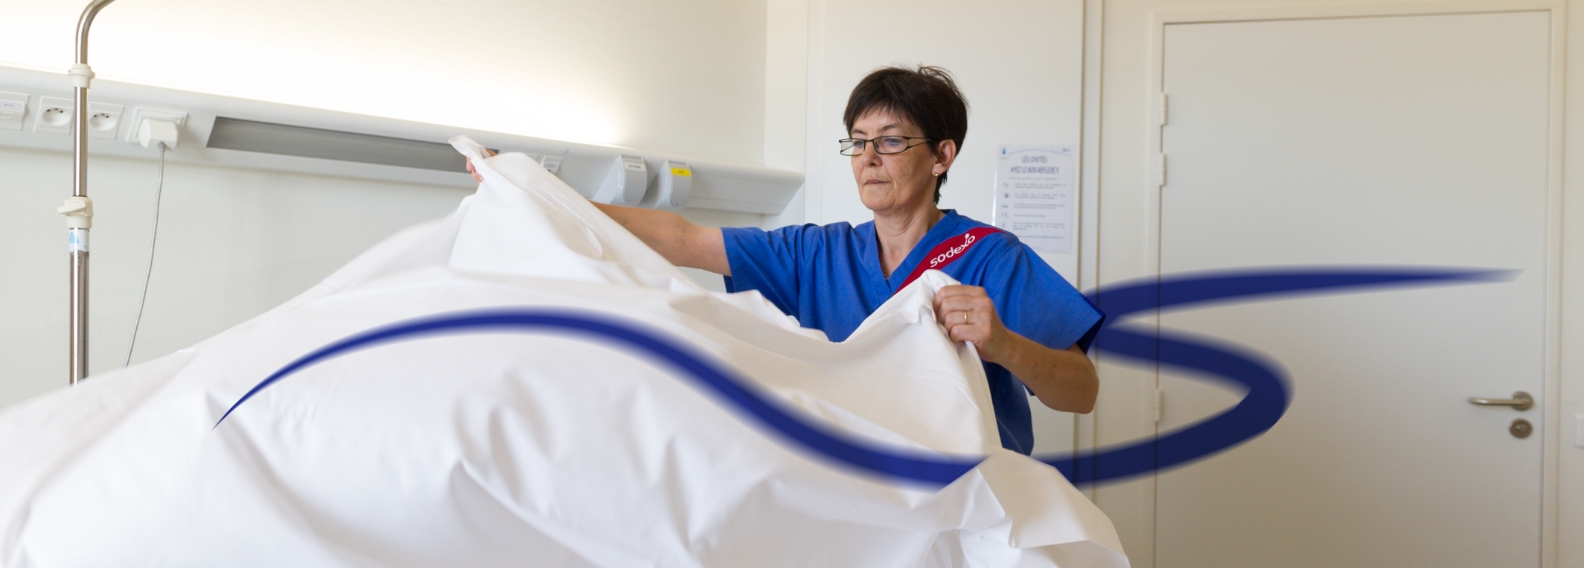 Hospital employee cleaning hospital bed